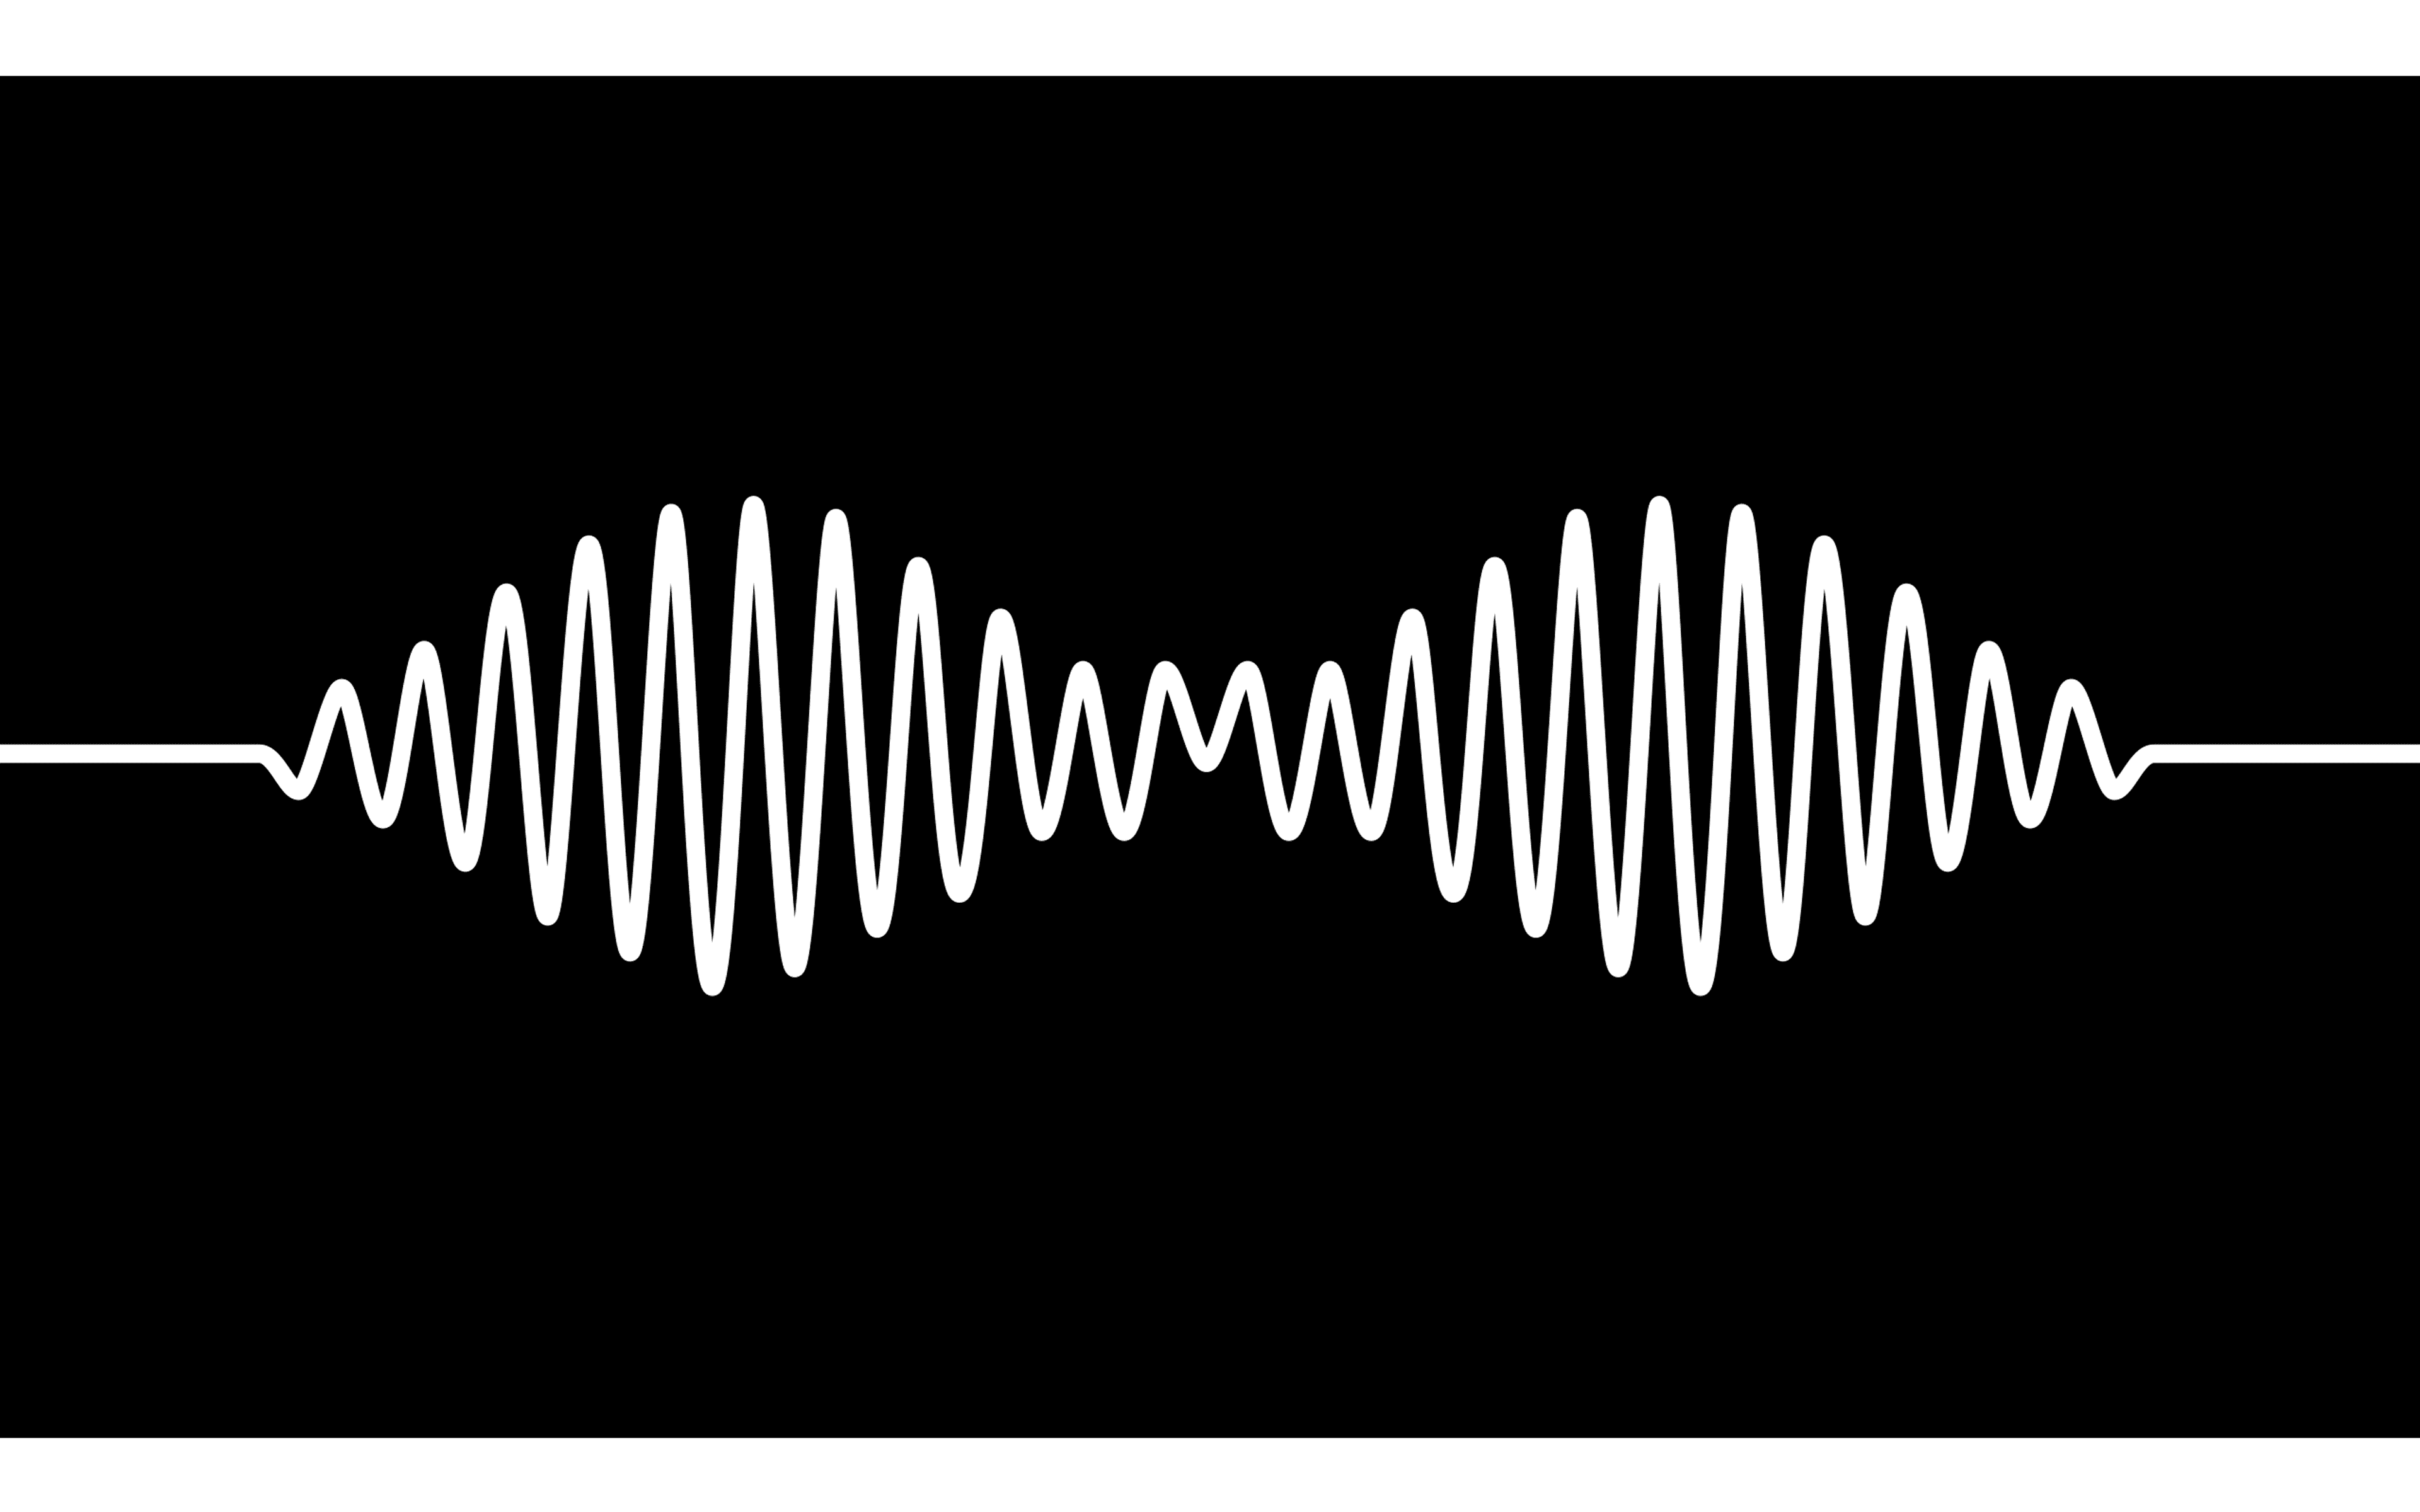 Arctic Monkeys logo and symbol, meaning, history, PNG